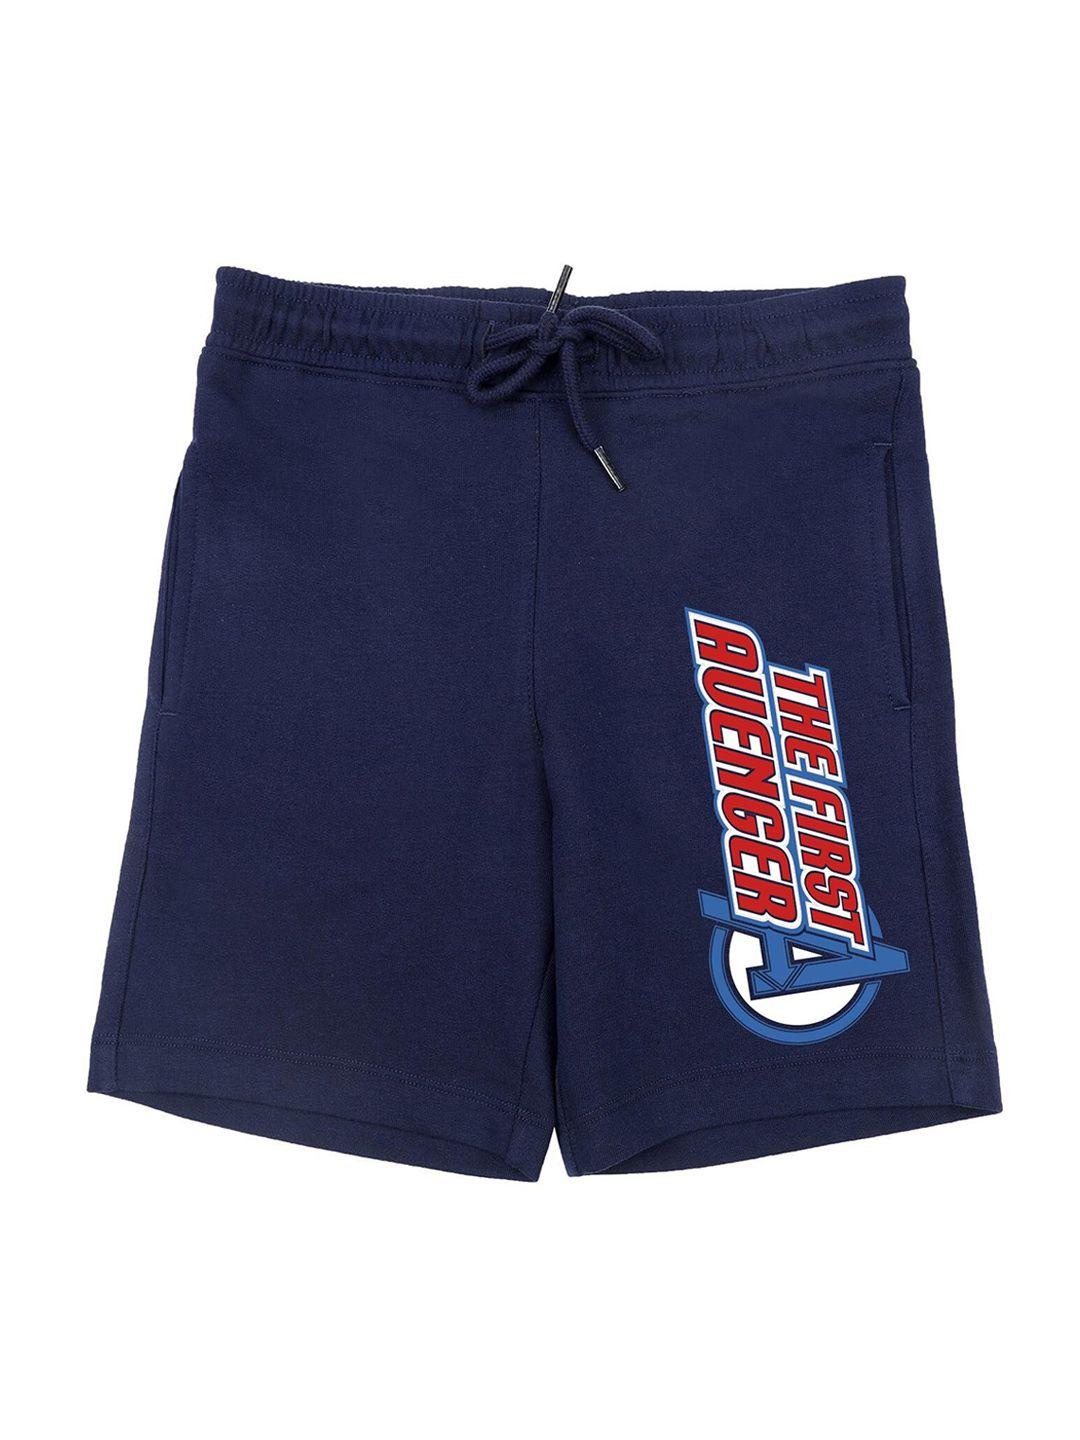 marvel-by-wear-your-mind-boys-navy-blue-graphic-printed-regular-fit-shorts